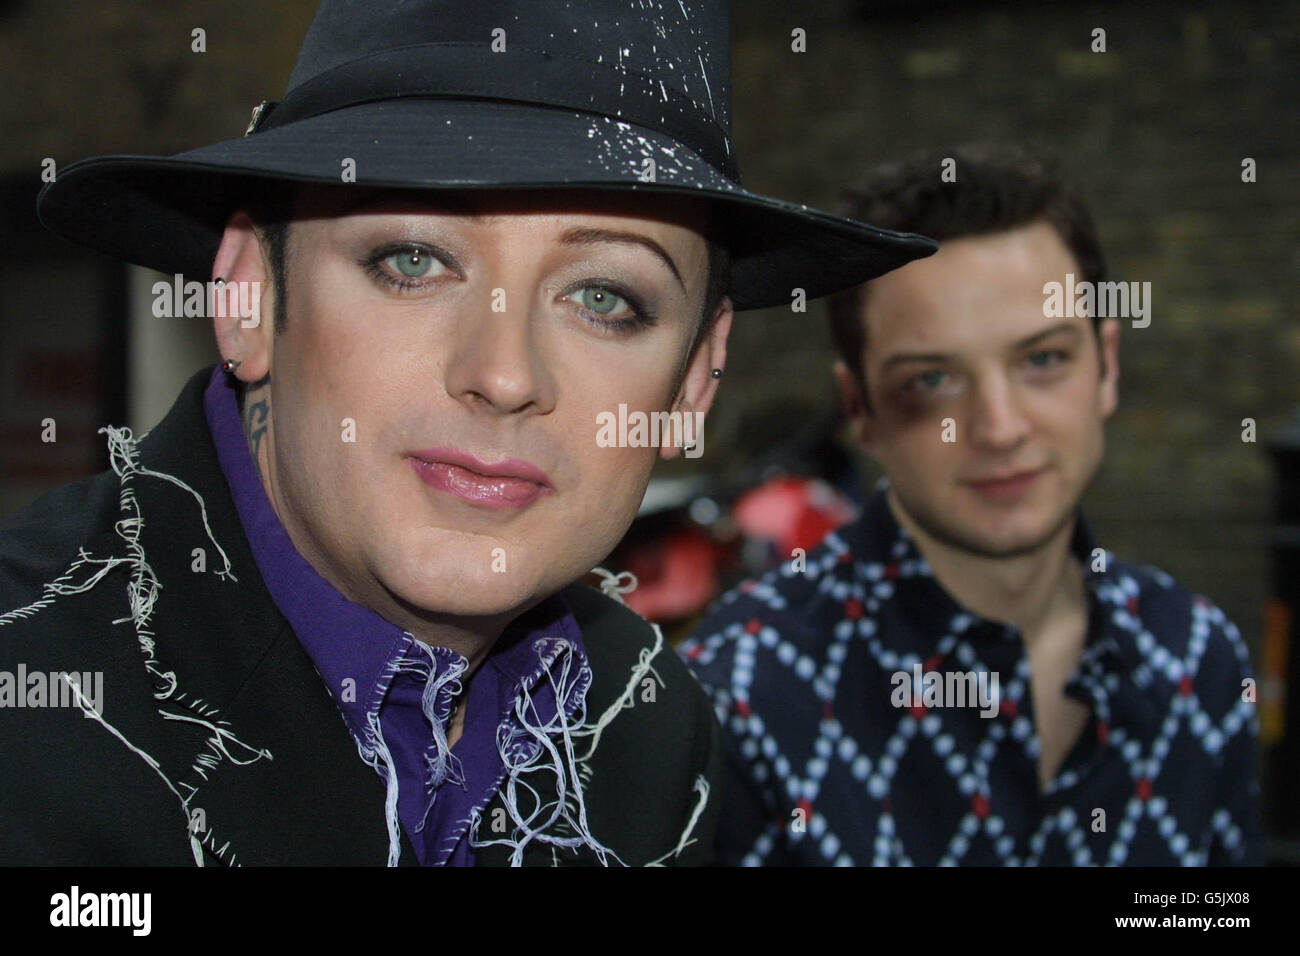 Culture Club's Boy George (L) with Euan Morton during a photocall in London, where it was announced that Morton will make his West End debut, when he plays a singer/DJ in Taboo, a musical with music and lyrics by George based on the 80's pop era. Stock Photo